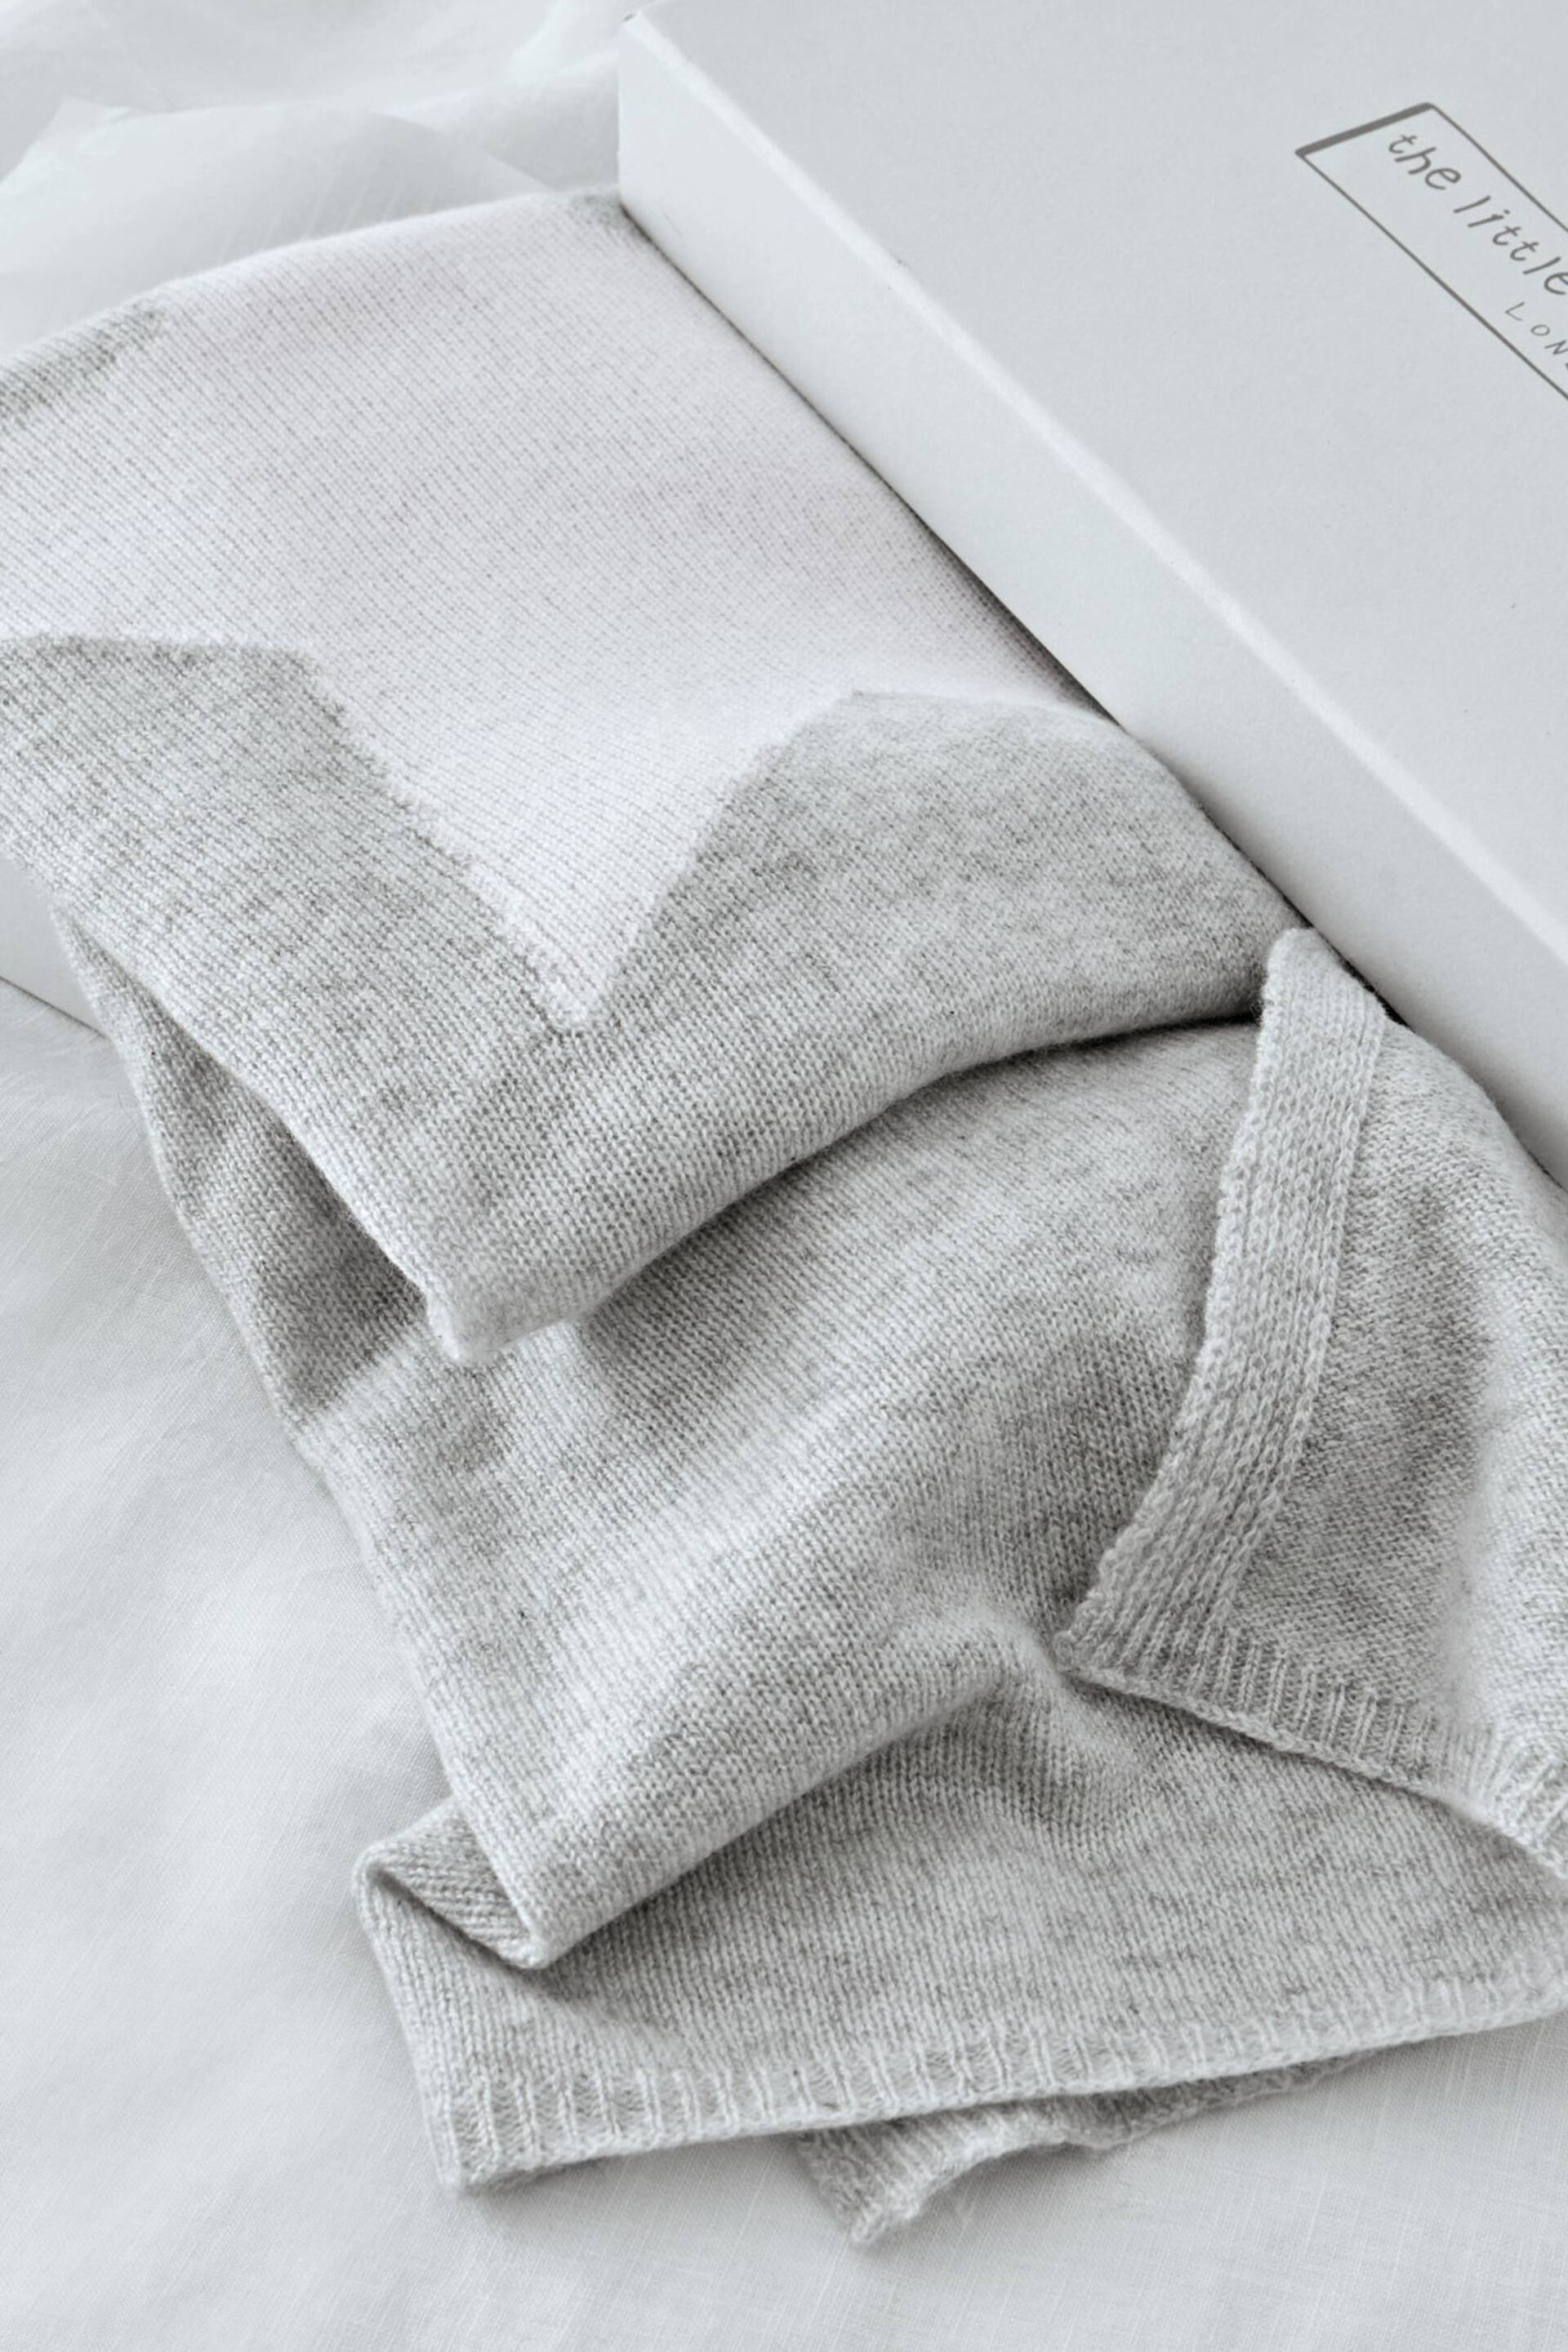 The White Company Baby Grey Star Luxury Cashmere Blanket - Image 1 of 4